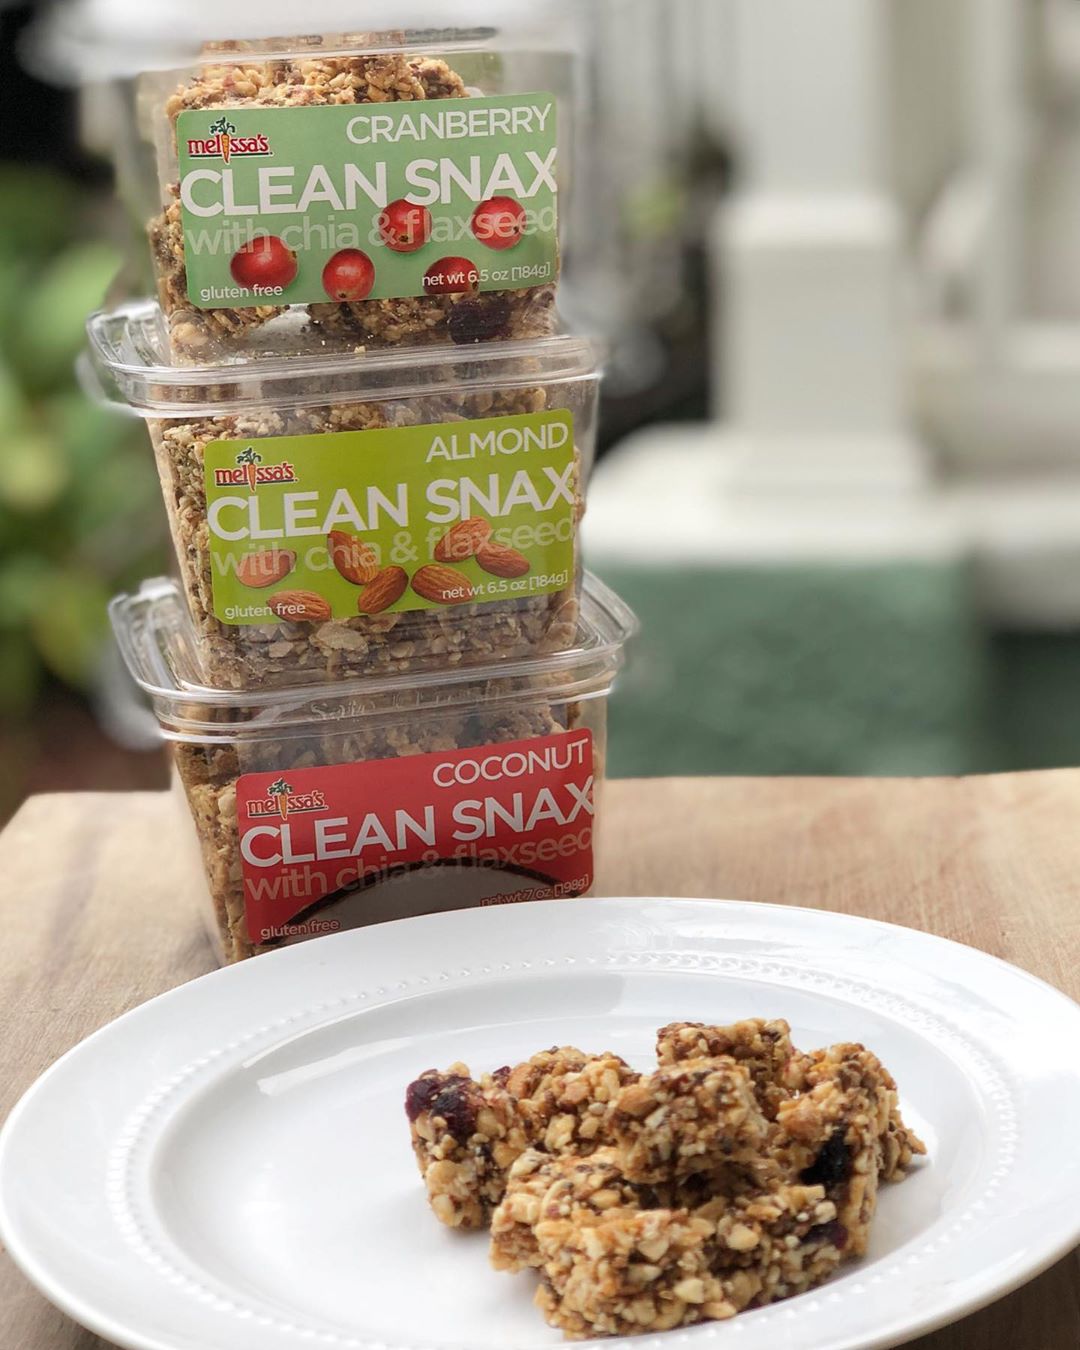 In a snack rut ?! Check out these @clean_snax granola bites made with chia and…